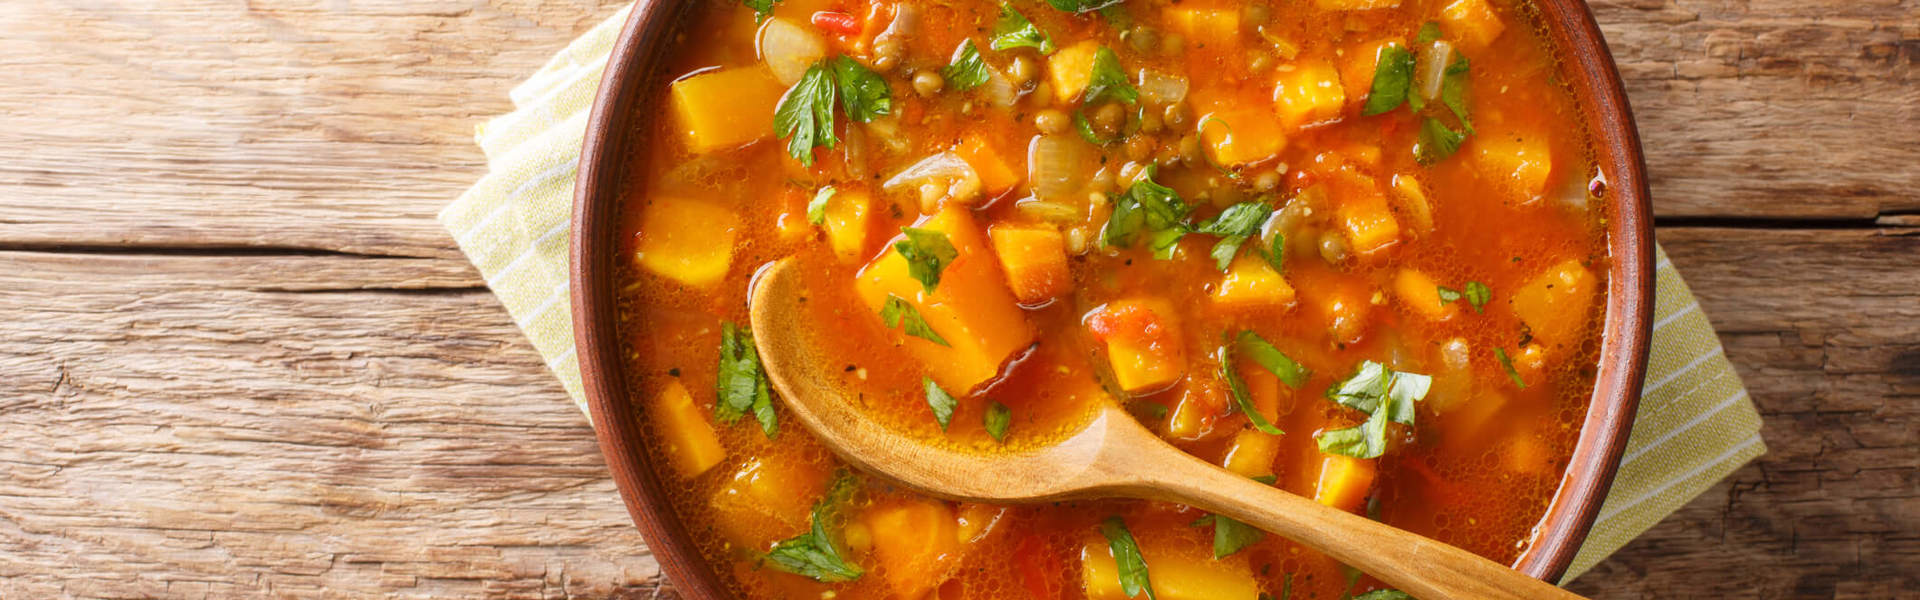 a bowl of homemade vegetable stew on a wooden background